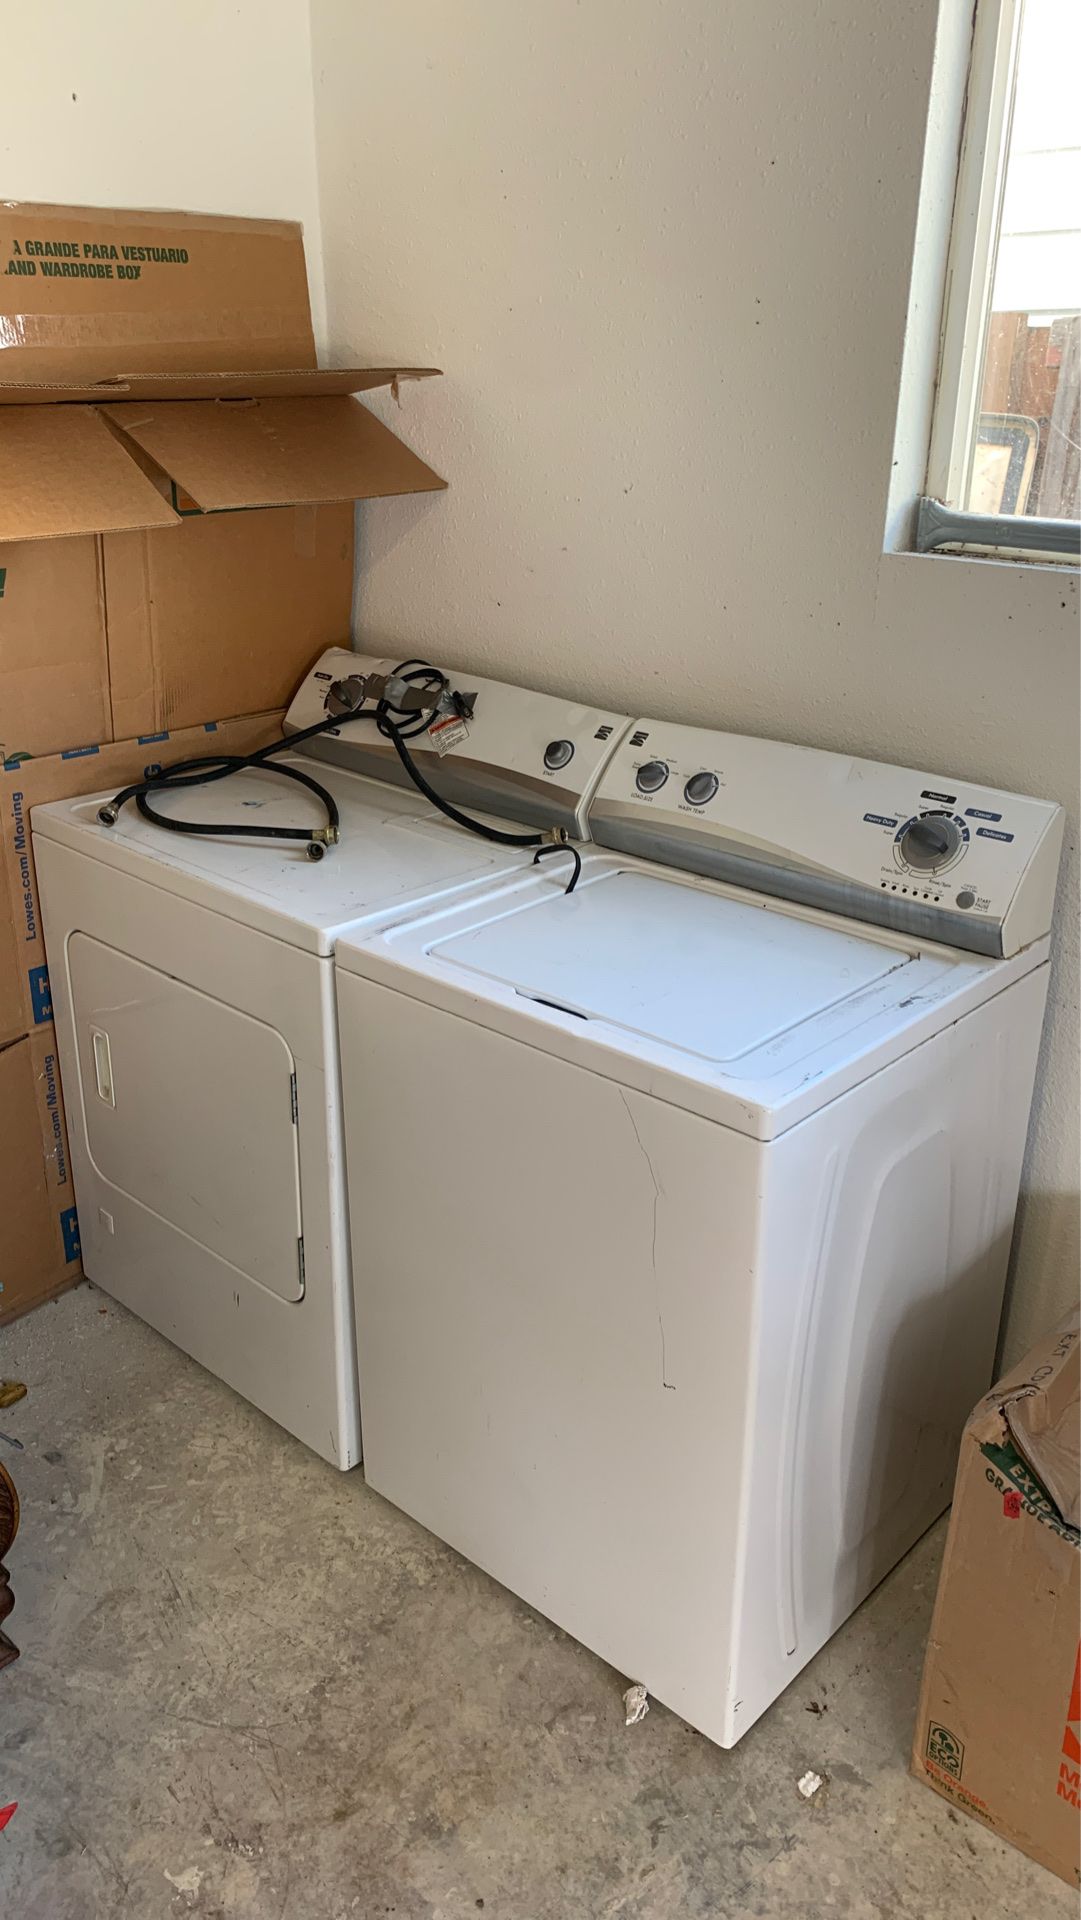 Kenmore gas washer and dryer